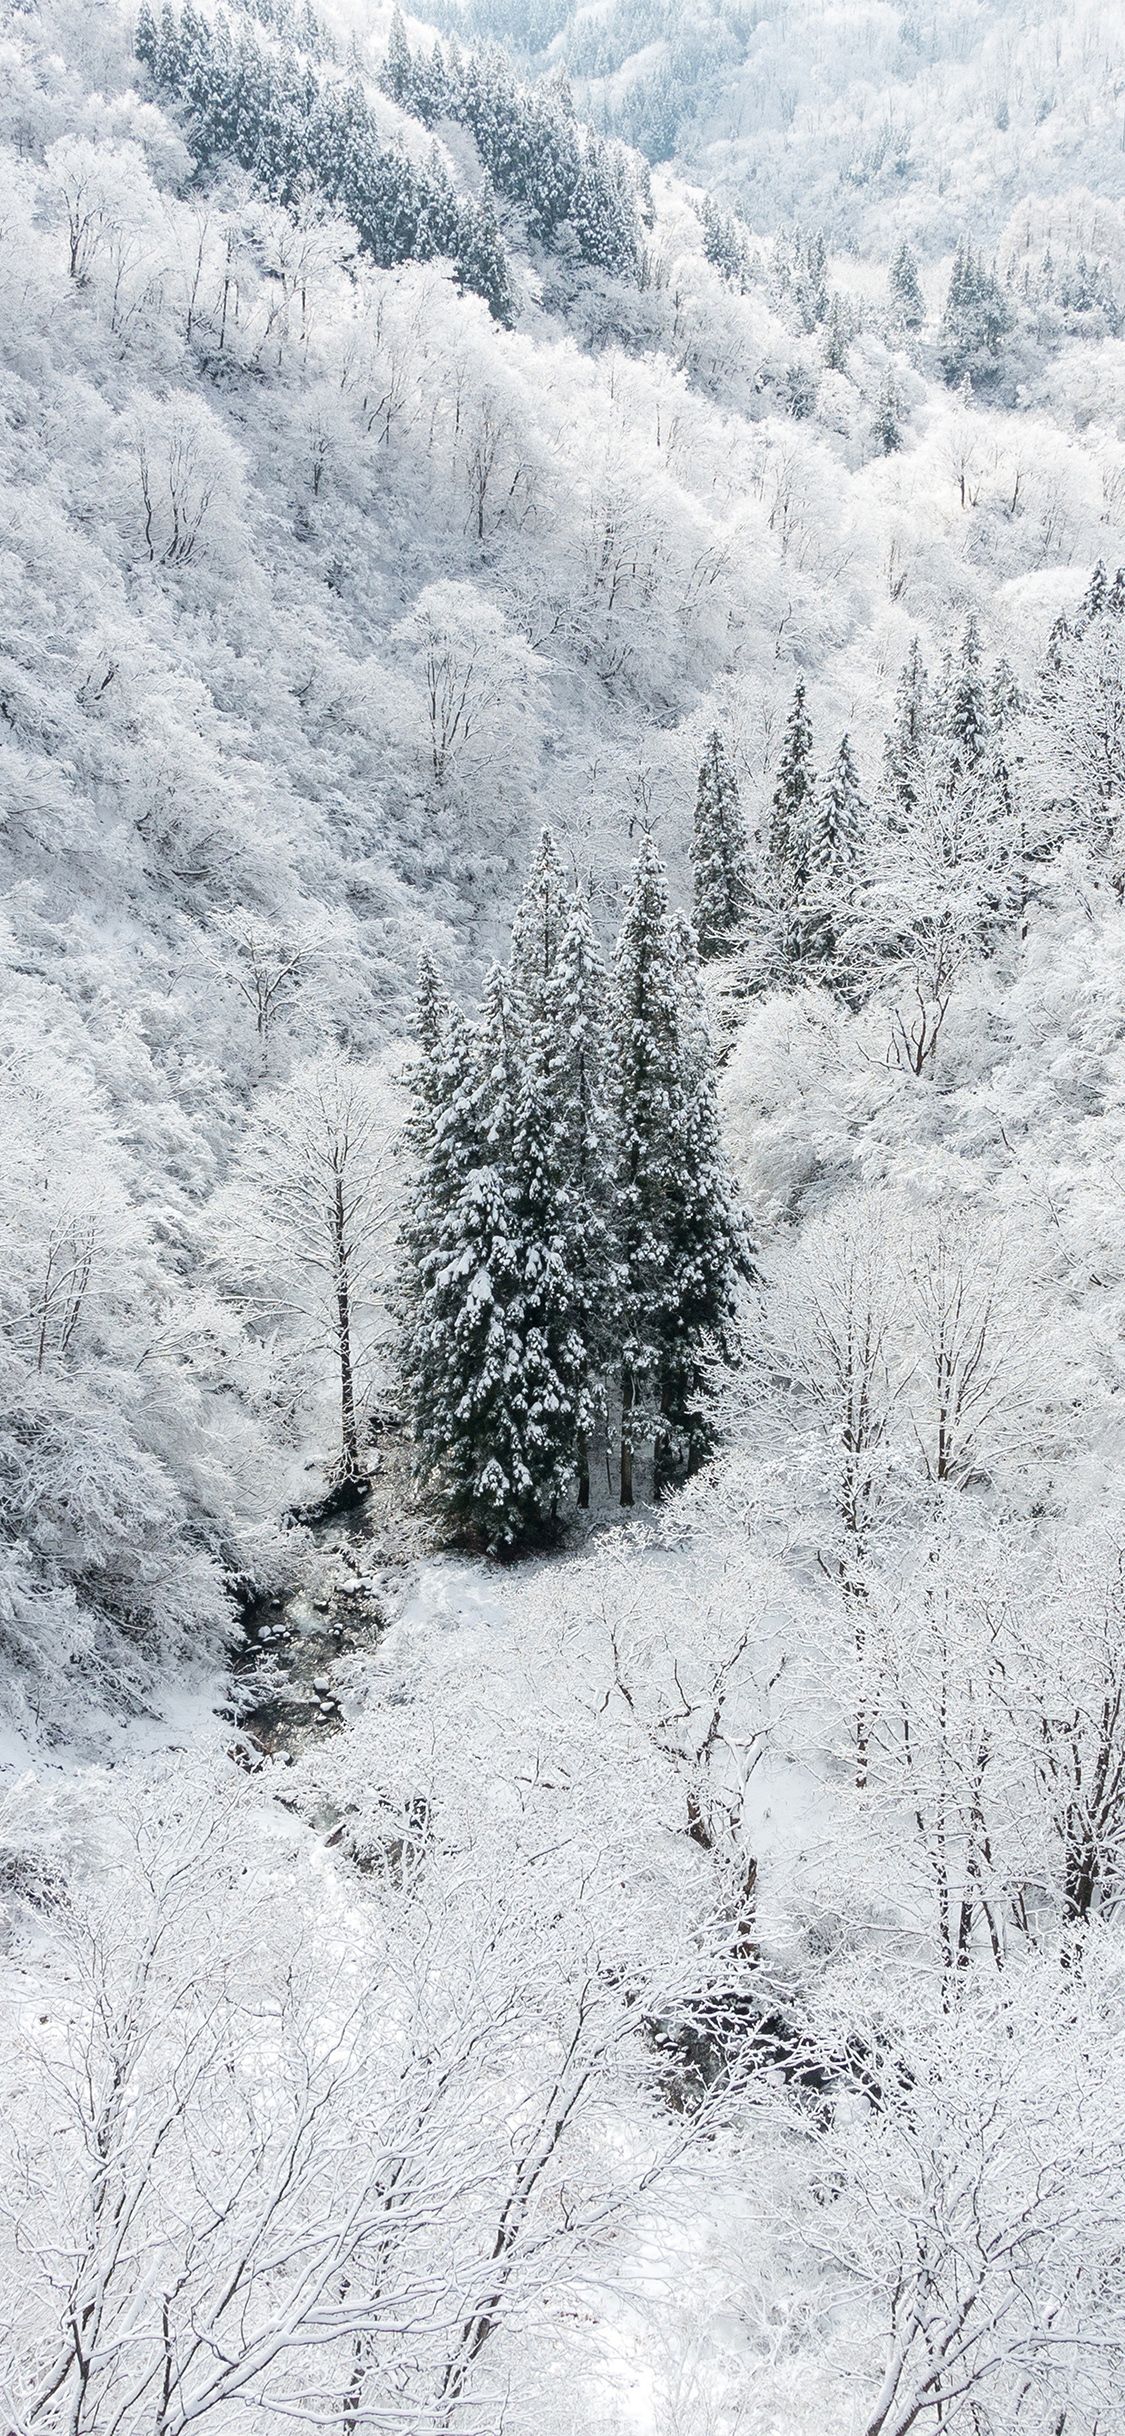 iPhone X wallpaper. winter white snow wood forest mountain